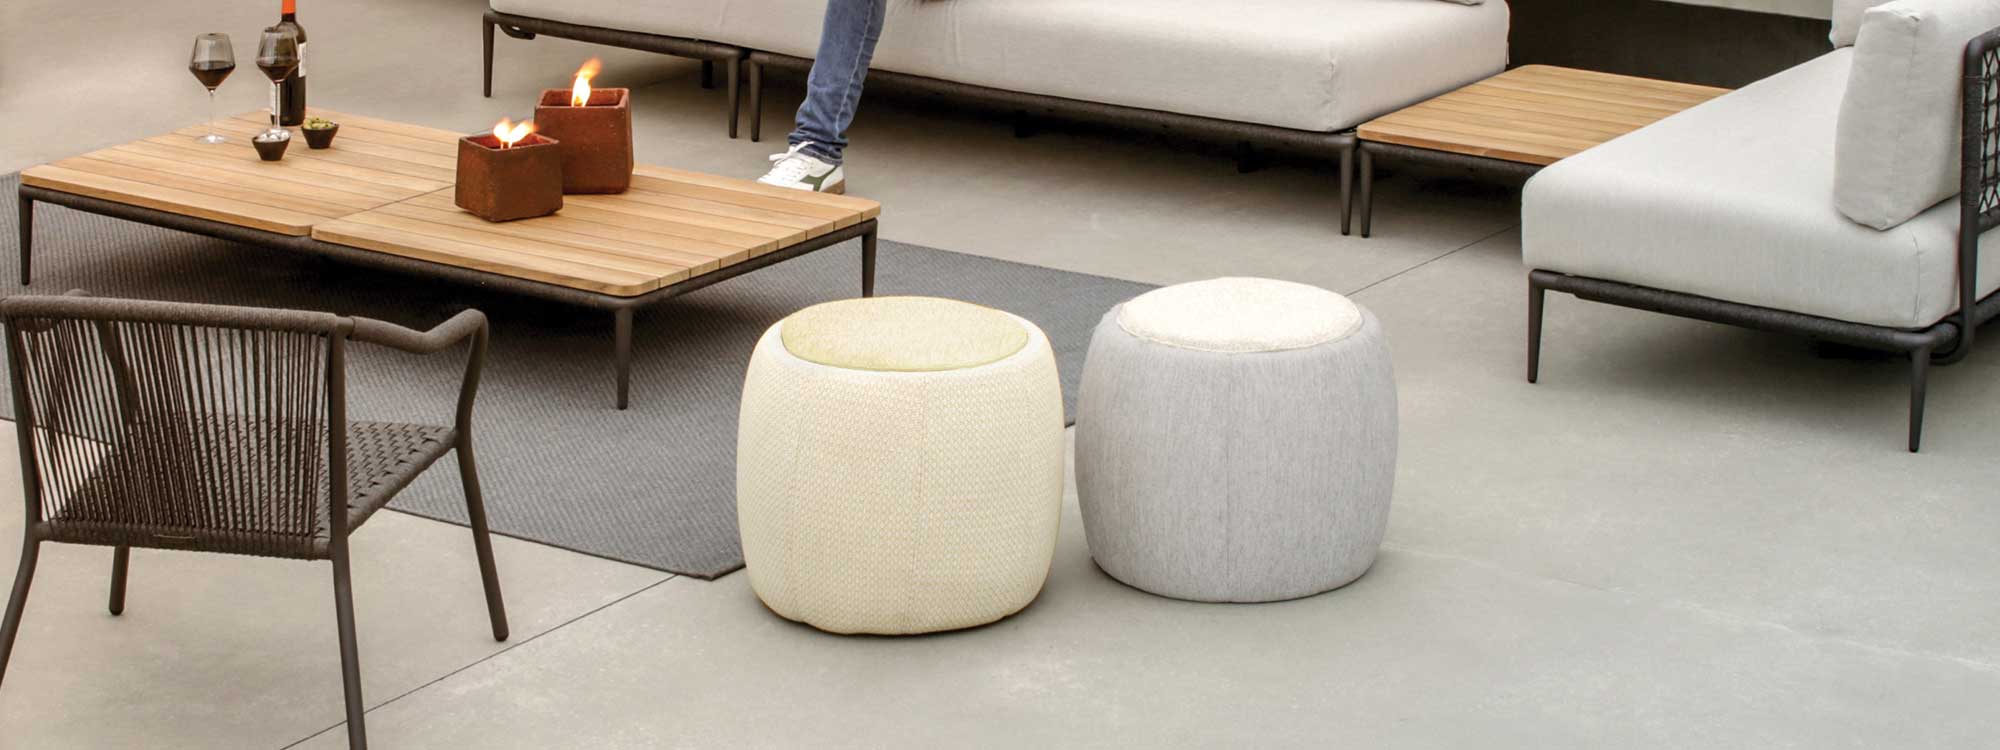 Tono modern garden pouf is a luxury outdoor pouffe in high quality garden furniture materials by Royal Botania outdoor furniture company